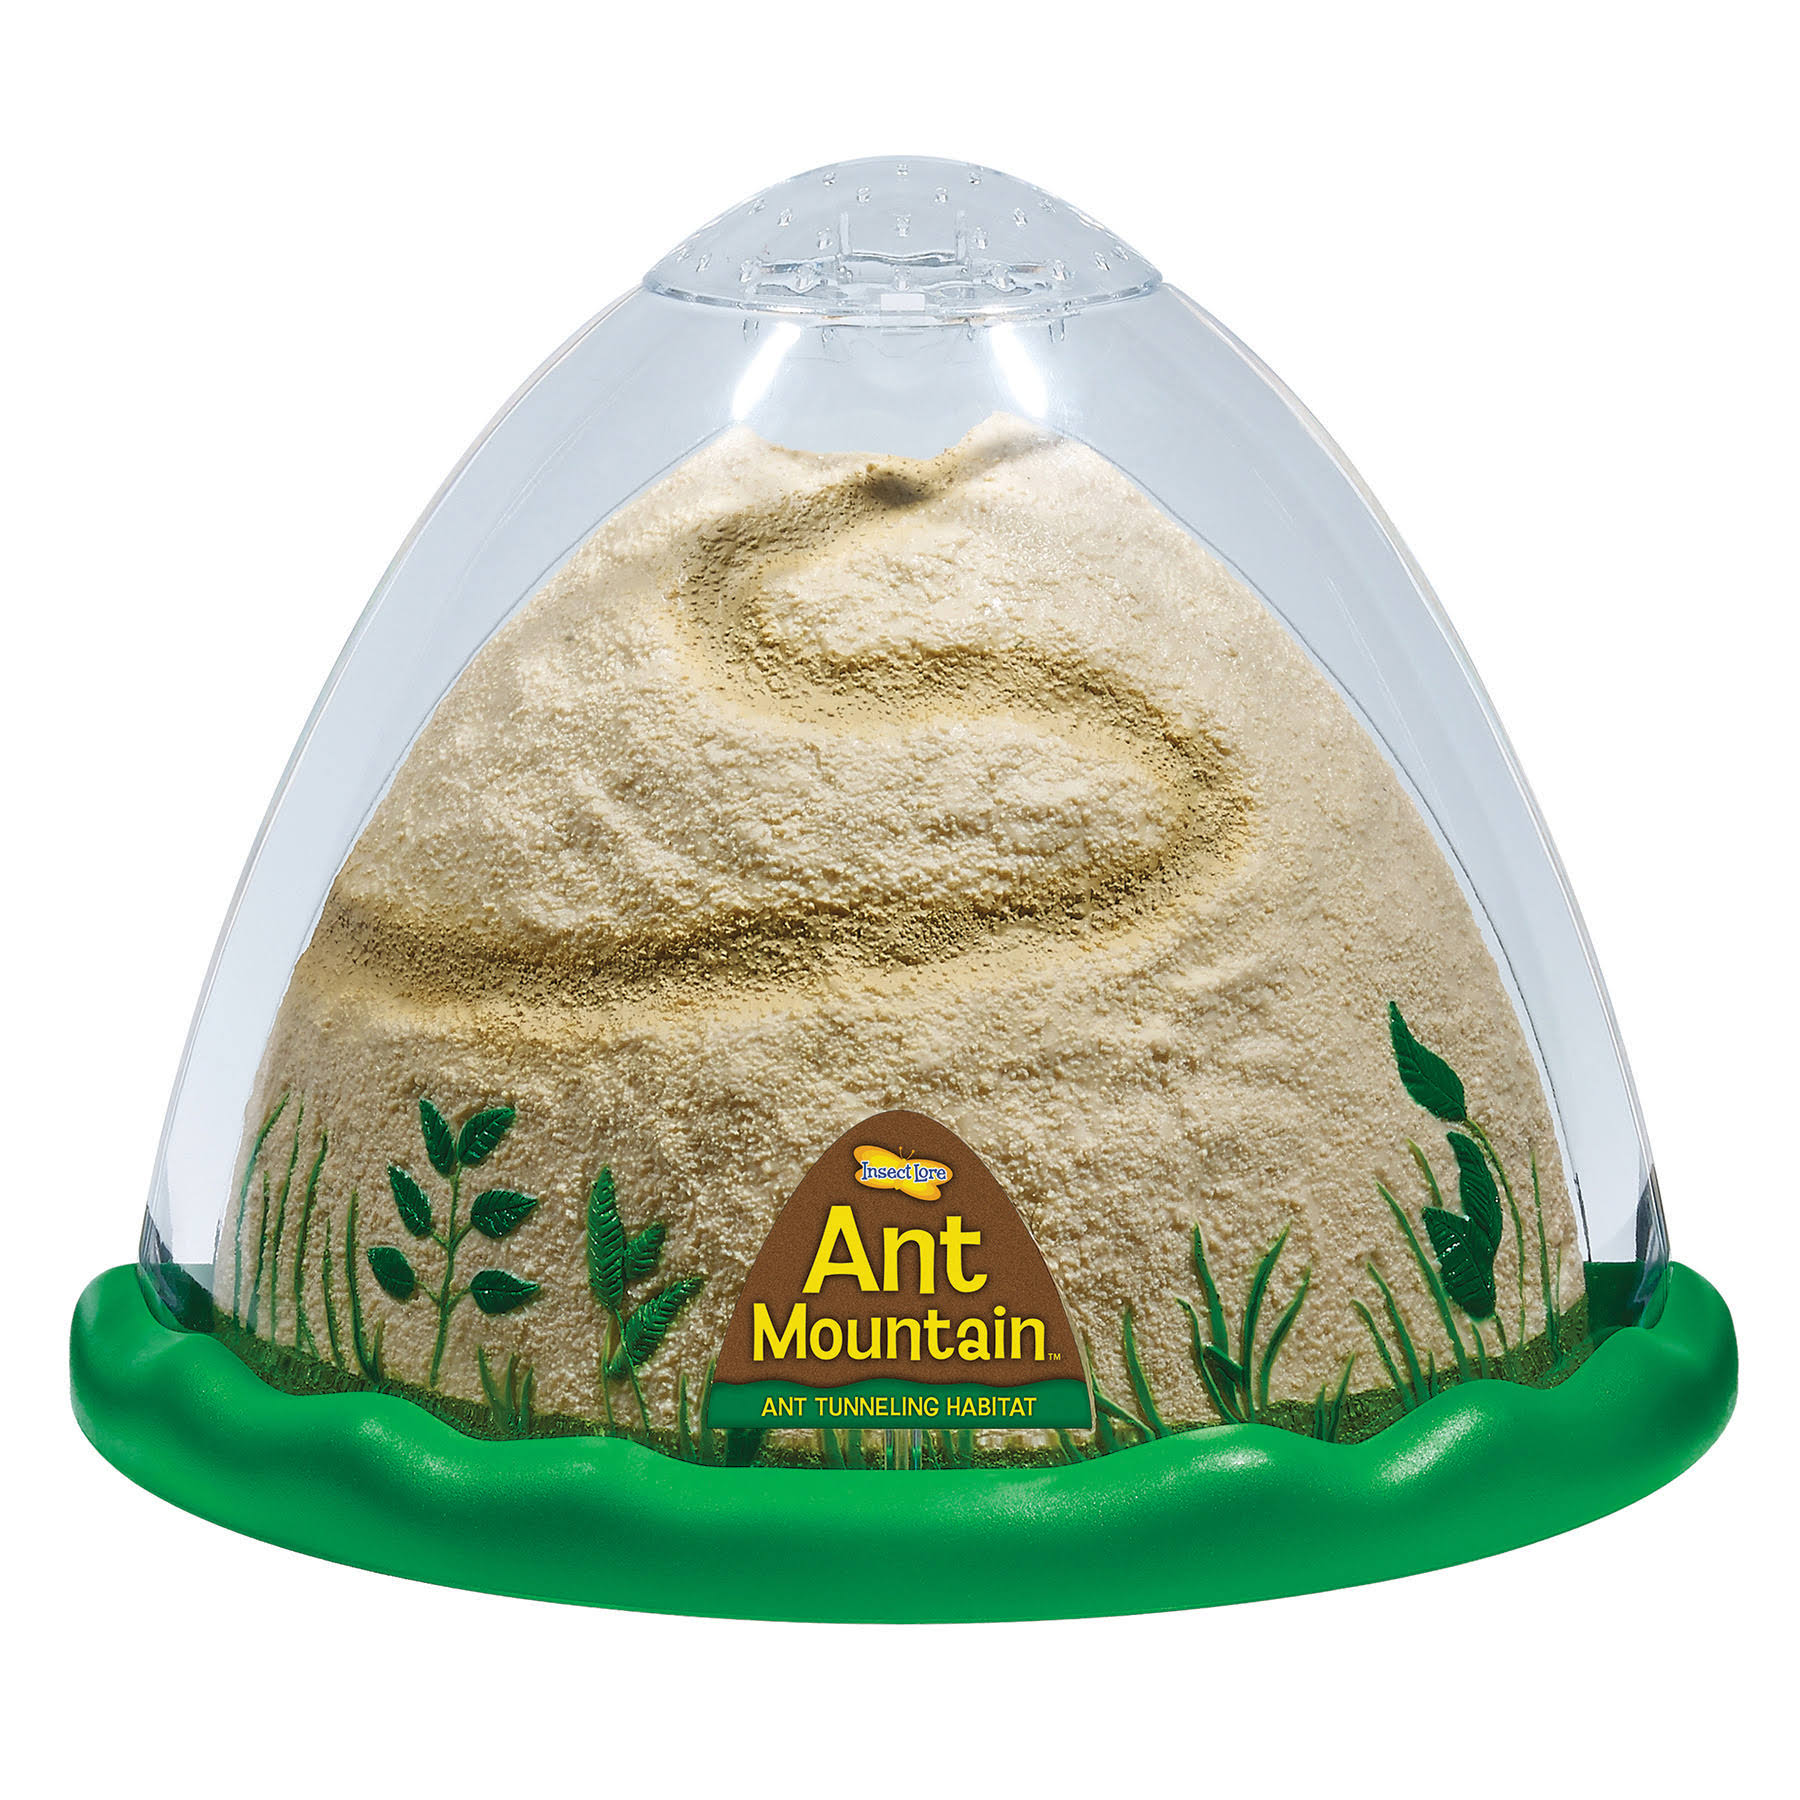 Ant Farm Viewing Habitat - Escape Proof Ant Hill Kit Includes Sand And Activity Book